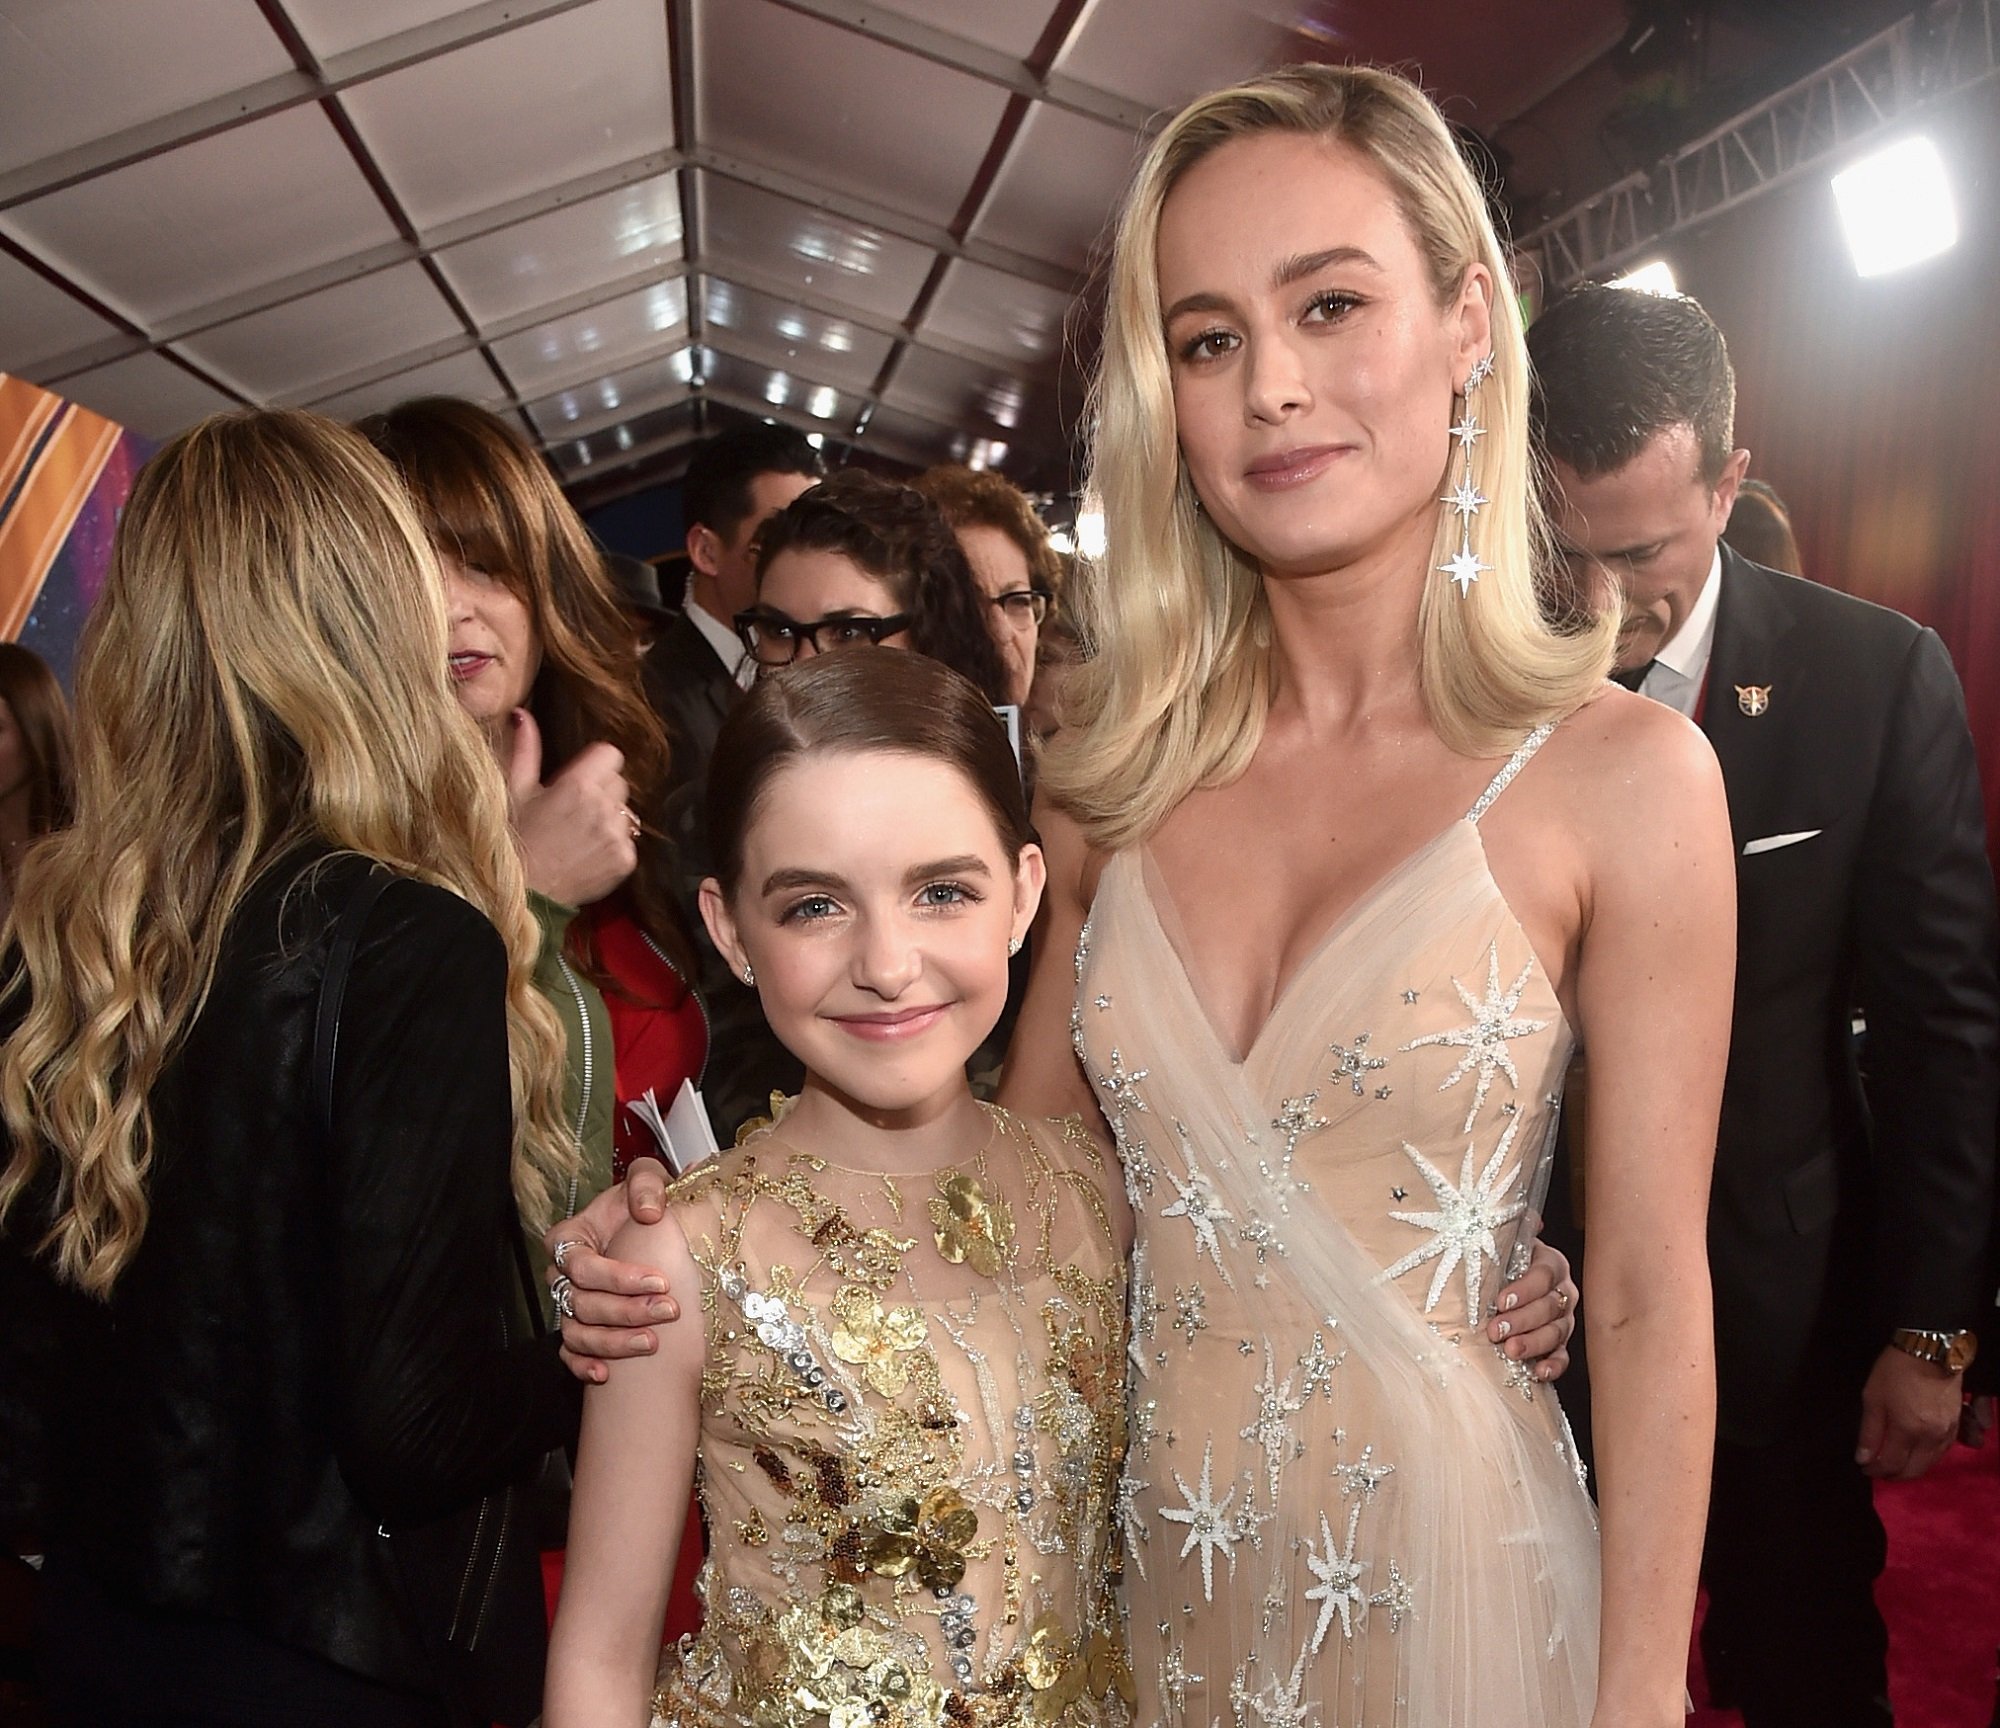 (L-R) Mckenna Grace and Brie Larson attend the Los Angeles World Premiere of Marvel Studios' 'Captain Marvel' on March 4, 2019